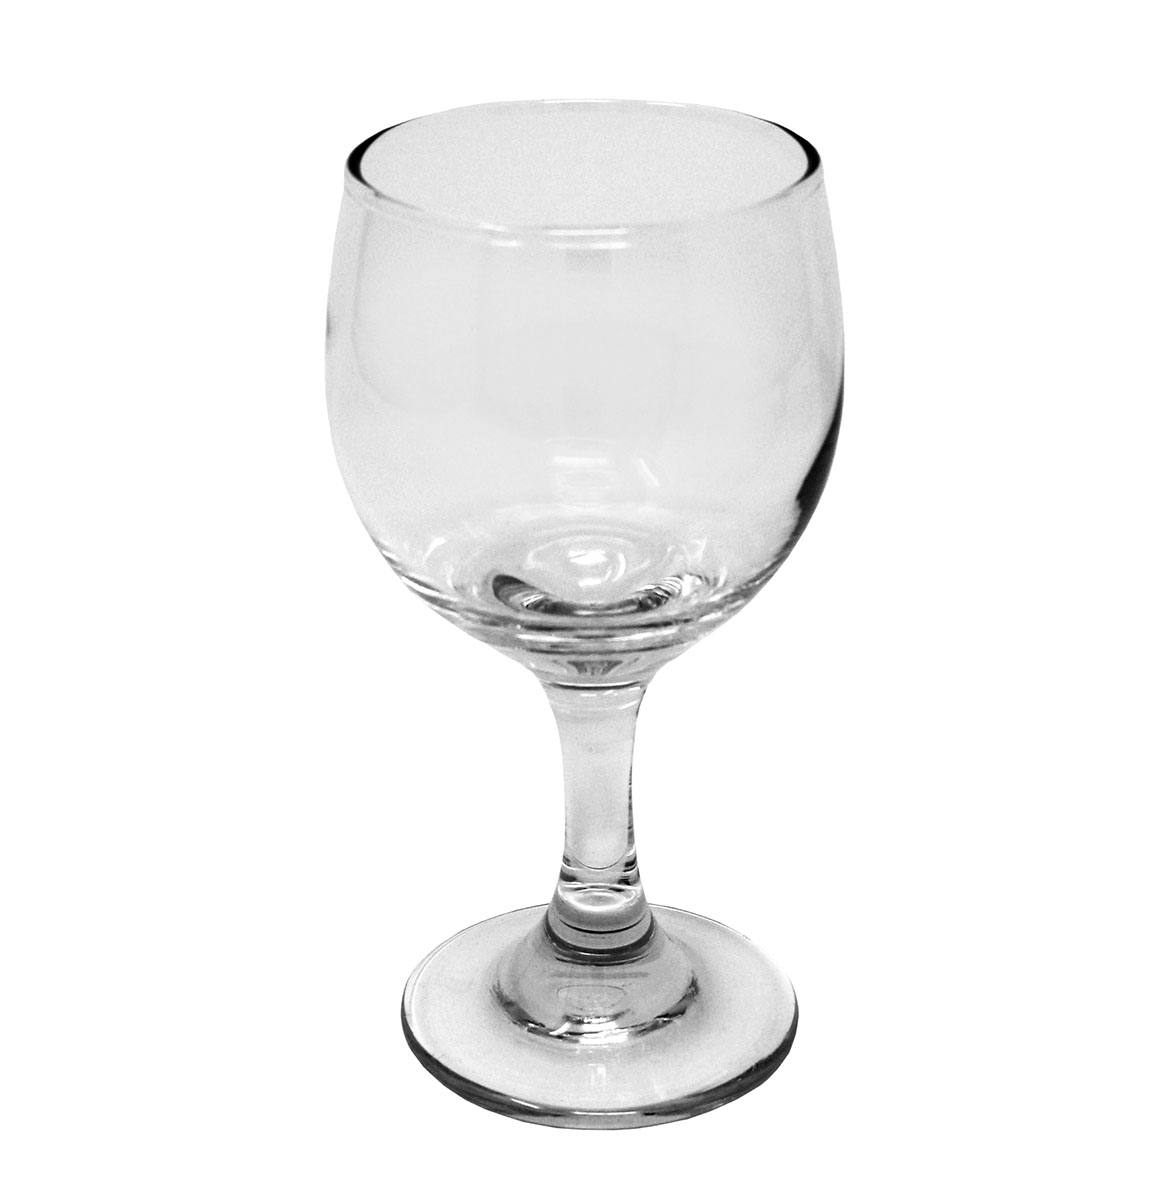 https://www.cantonchairrental.com/Resources/Images/Equipment_Guide/Wine%20Glass%206oz.jpg